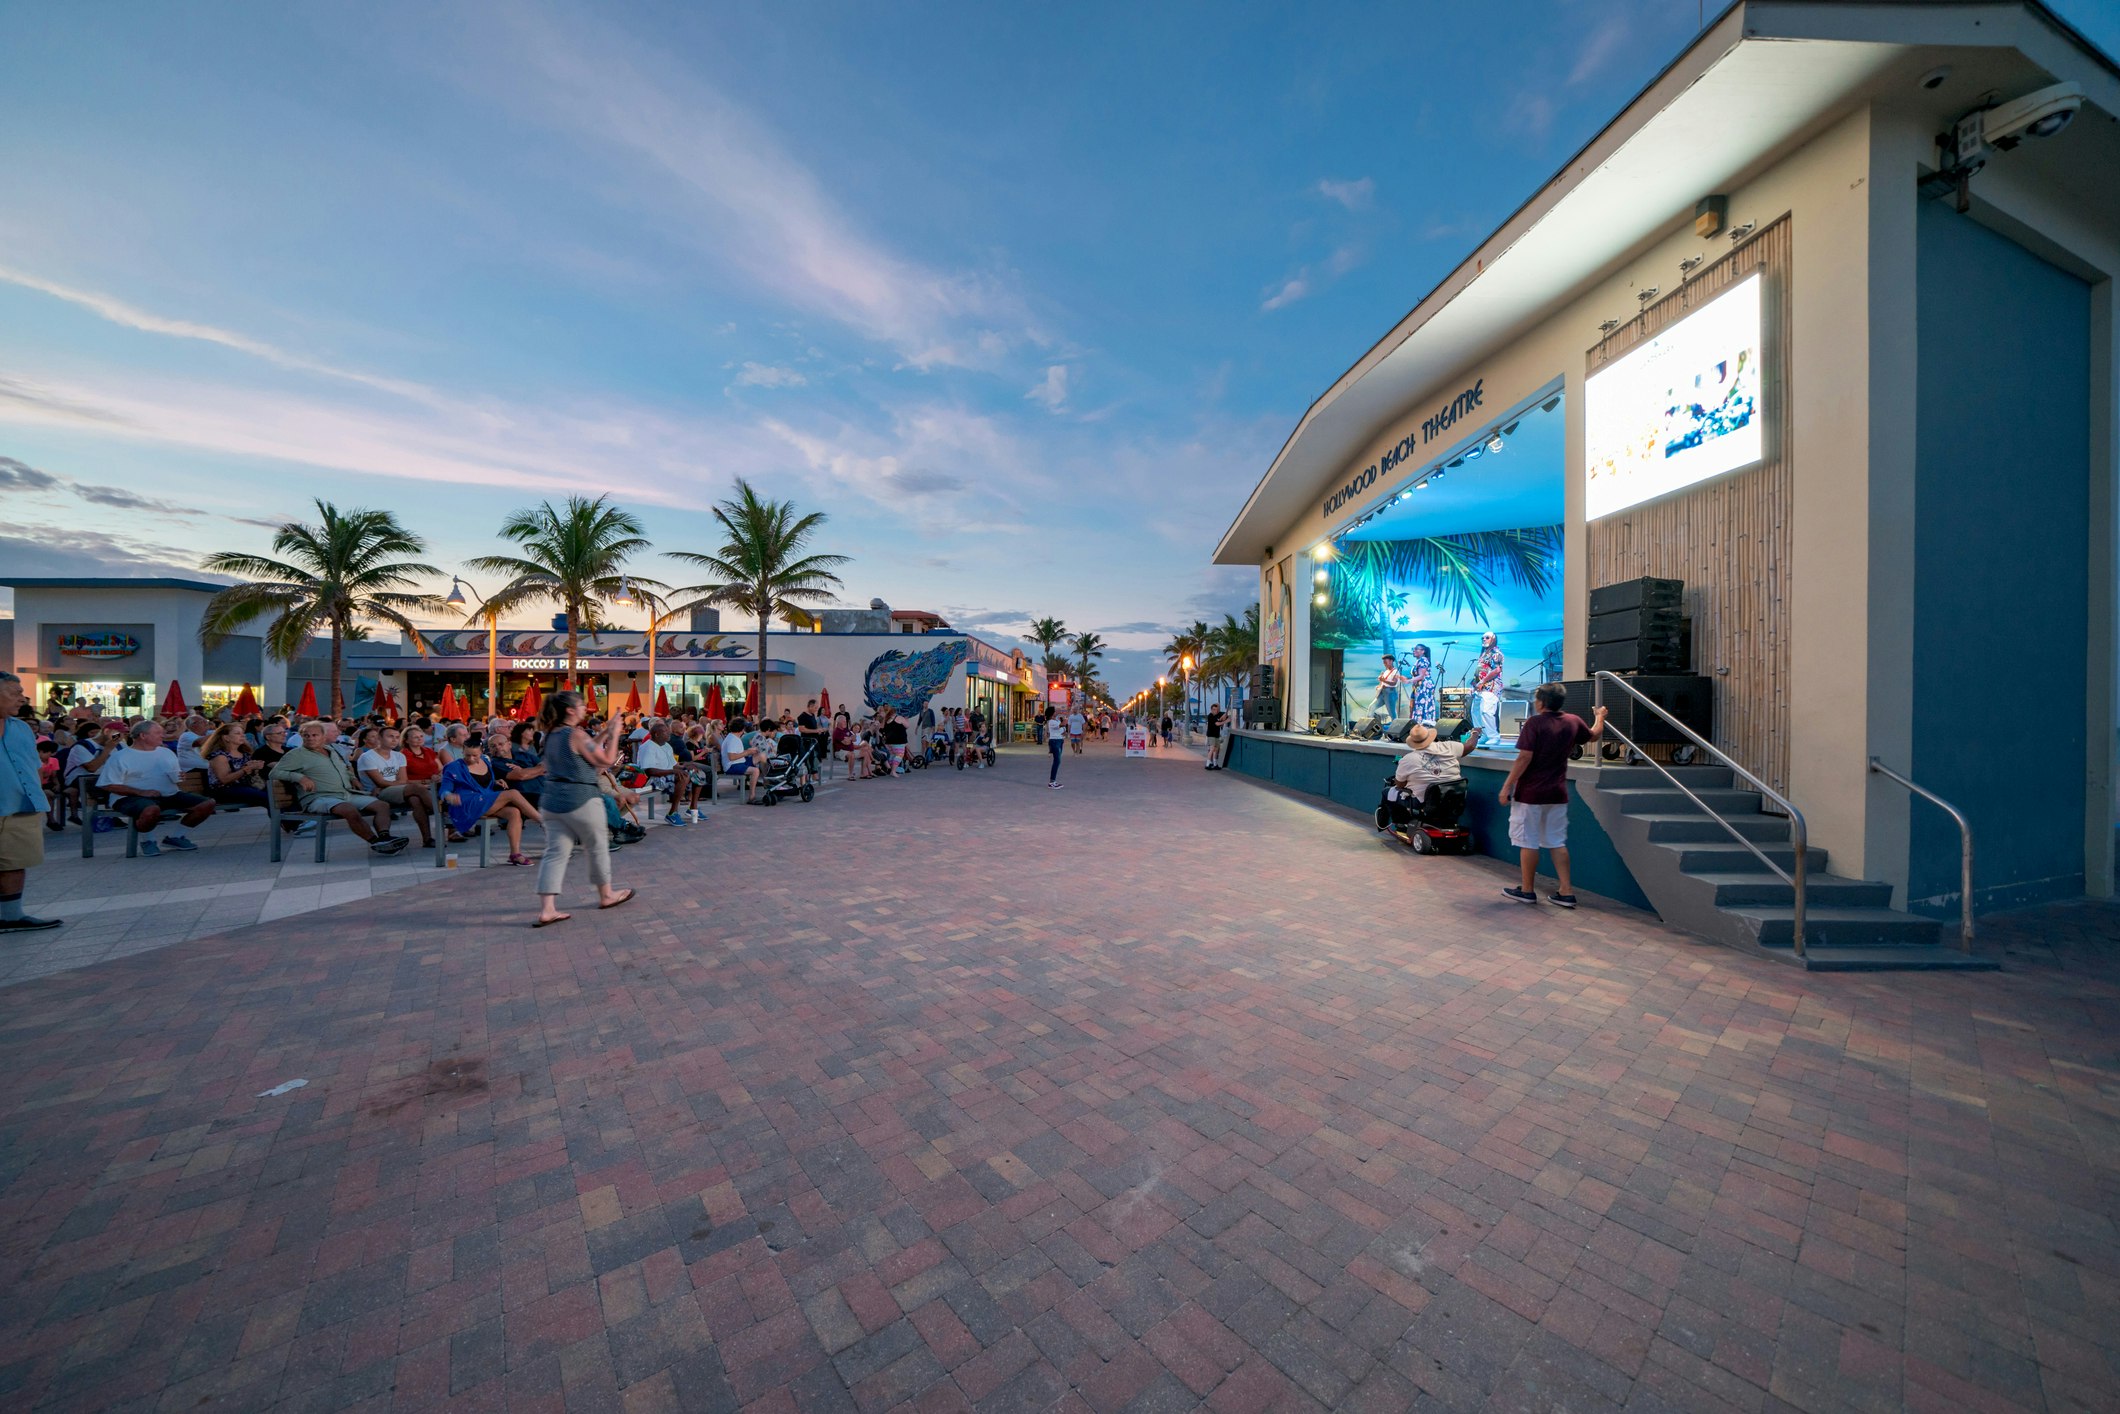 An outdoor live music venue